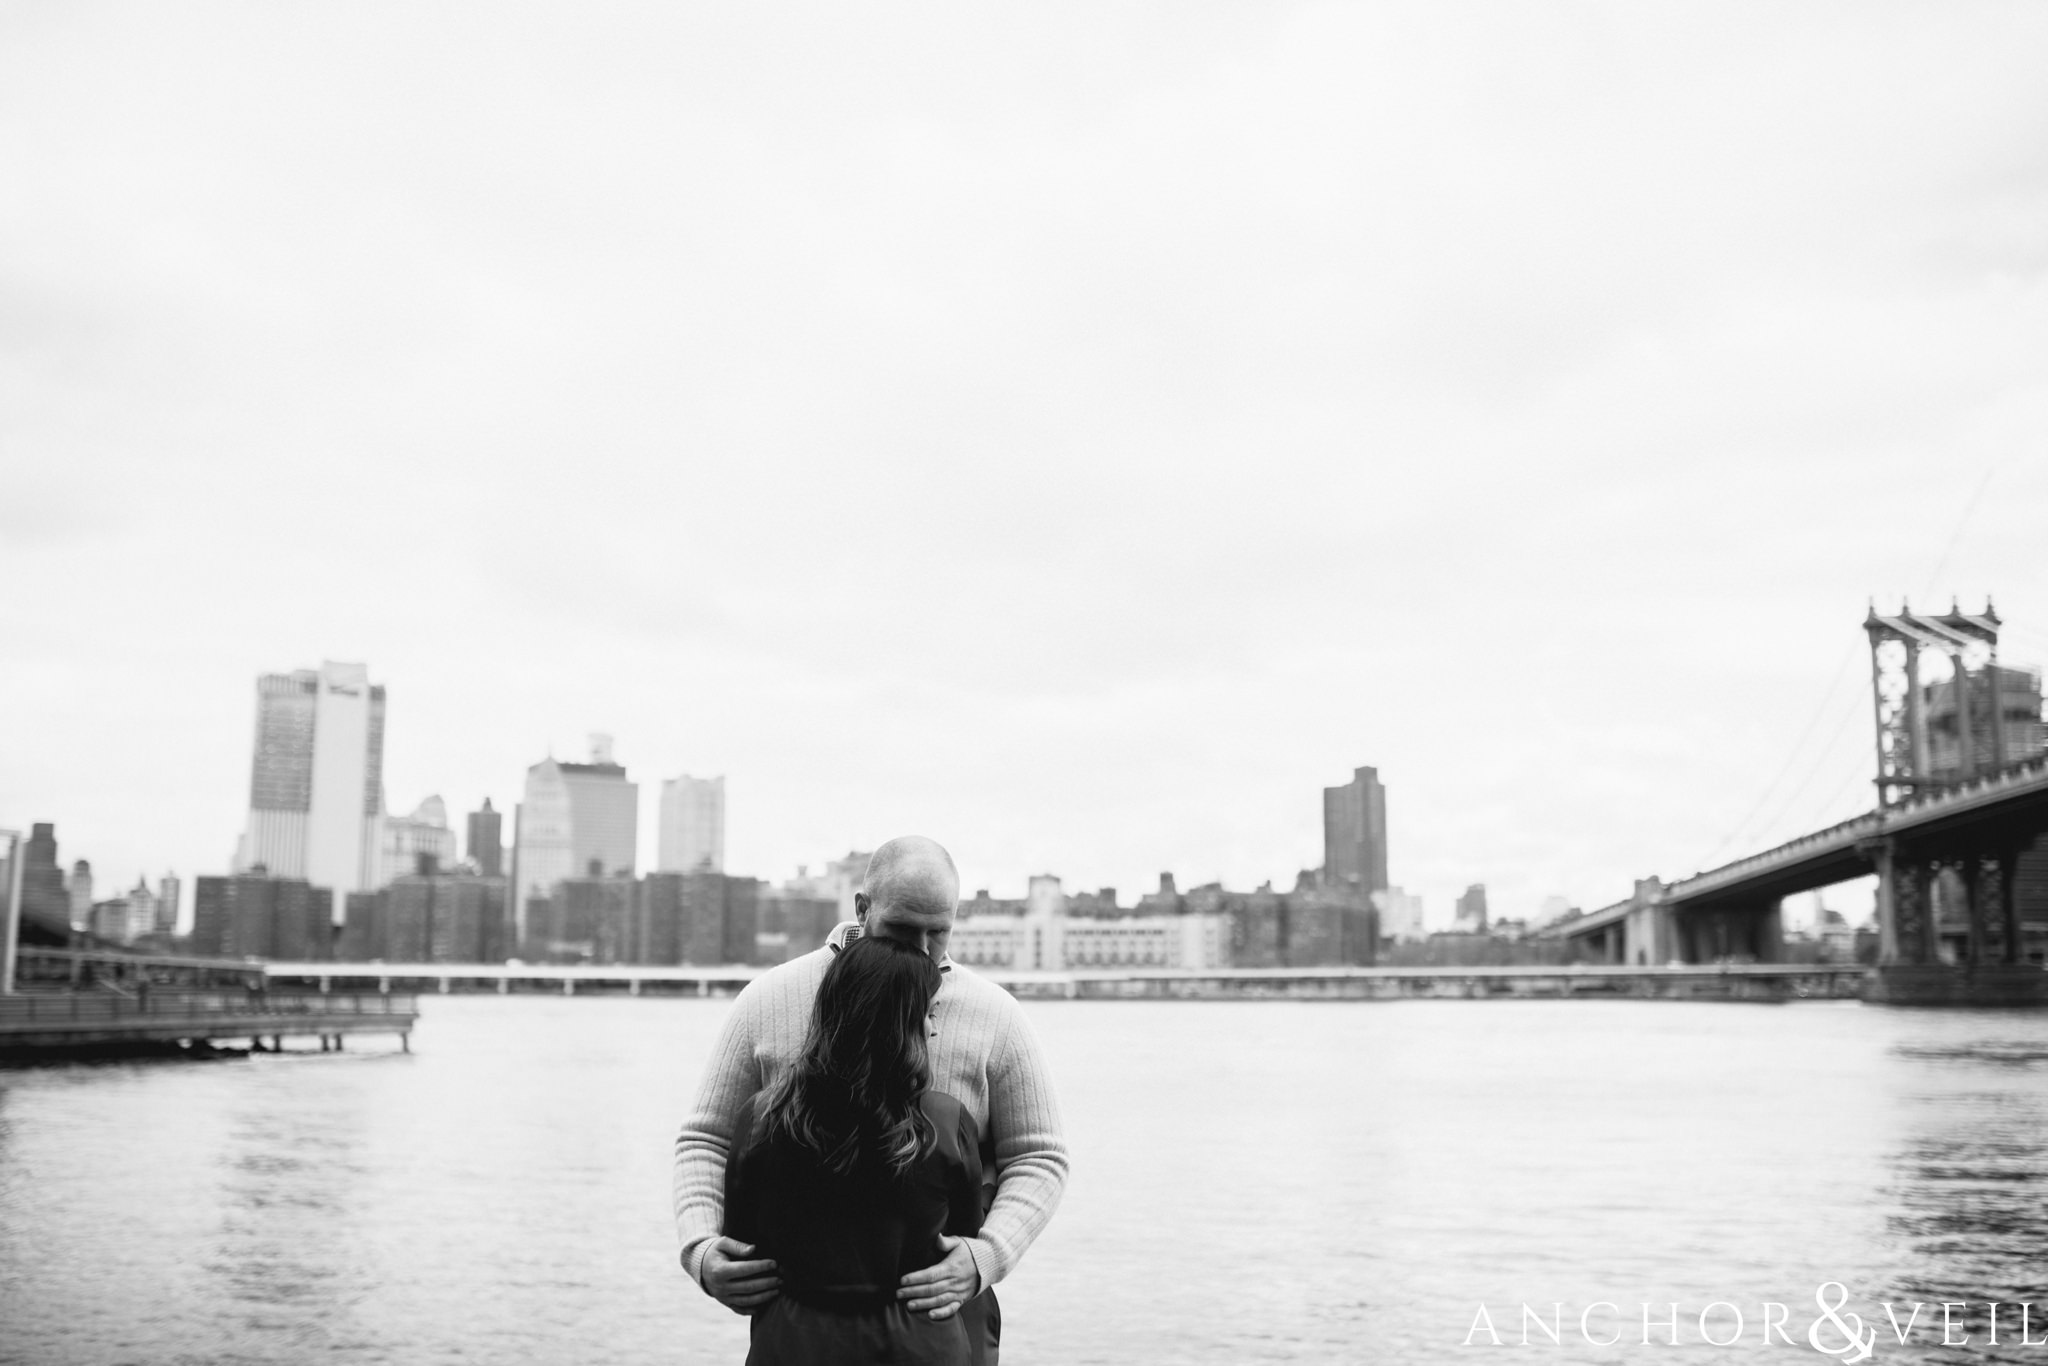 standing against the hudson river During their Dumbo Brooklyn New York engagement session